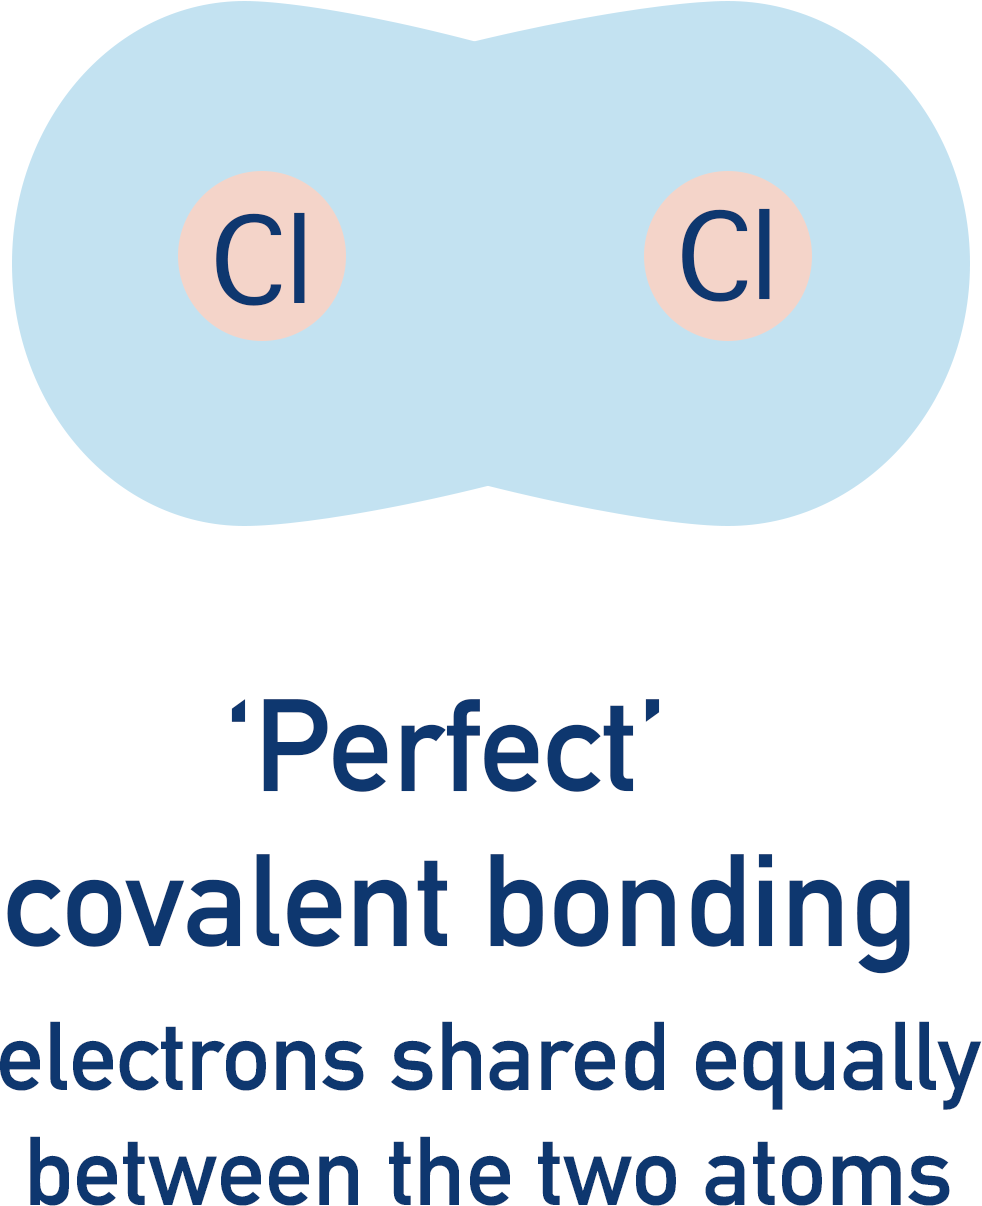 perfect covalent bond even sharing of electrons equal electronegativity